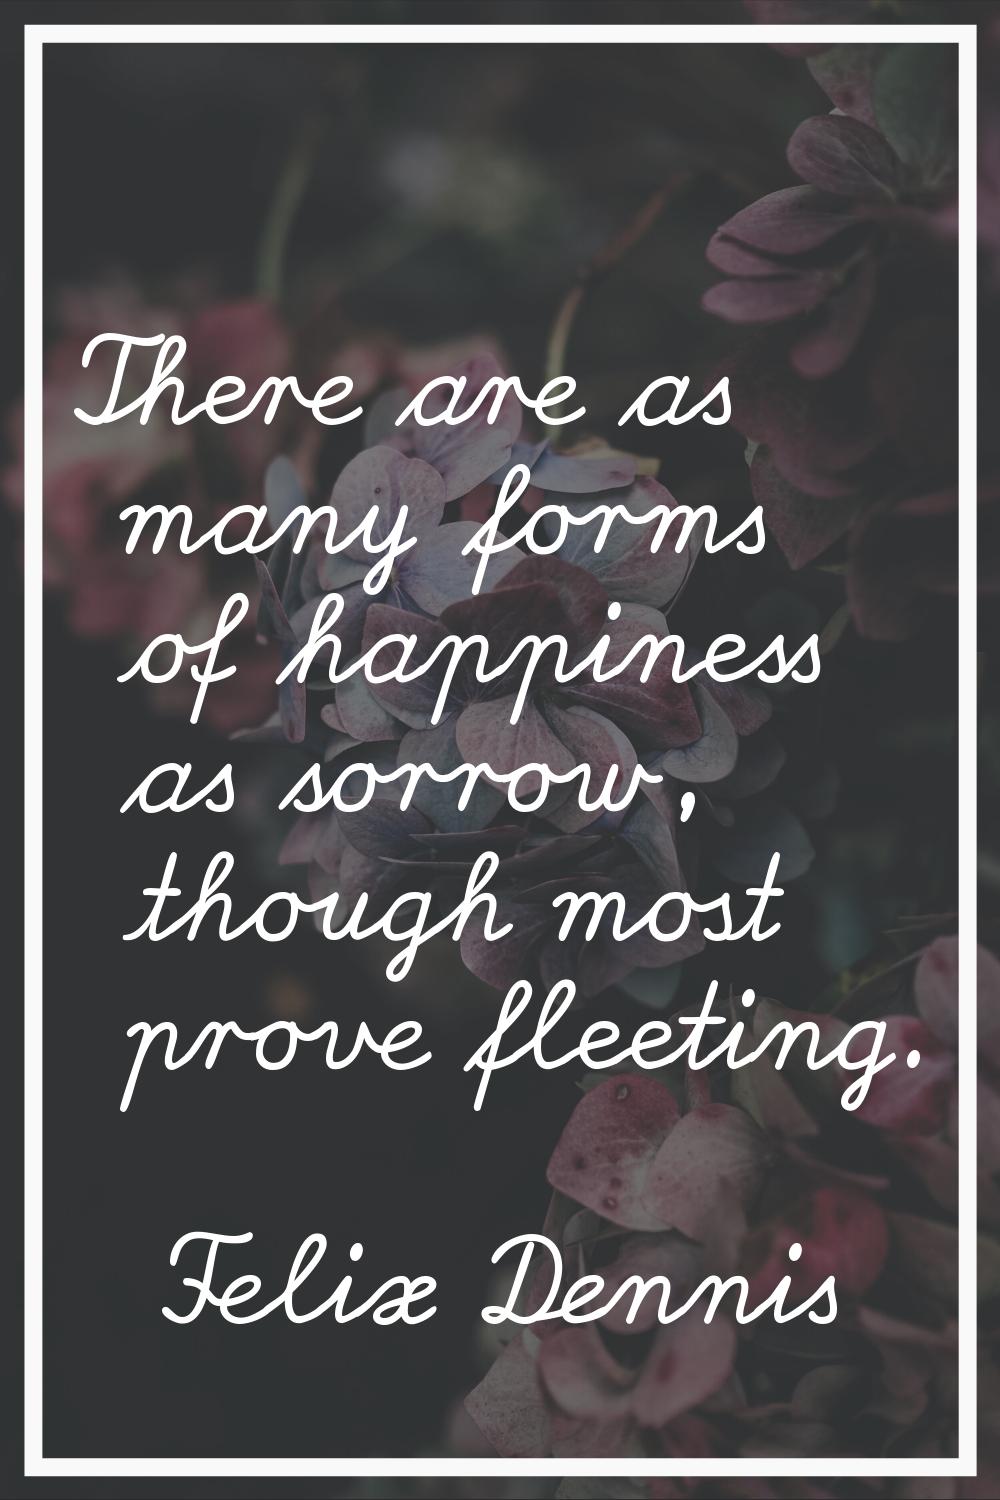 There are as many forms of happiness as sorrow, though most prove fleeting.